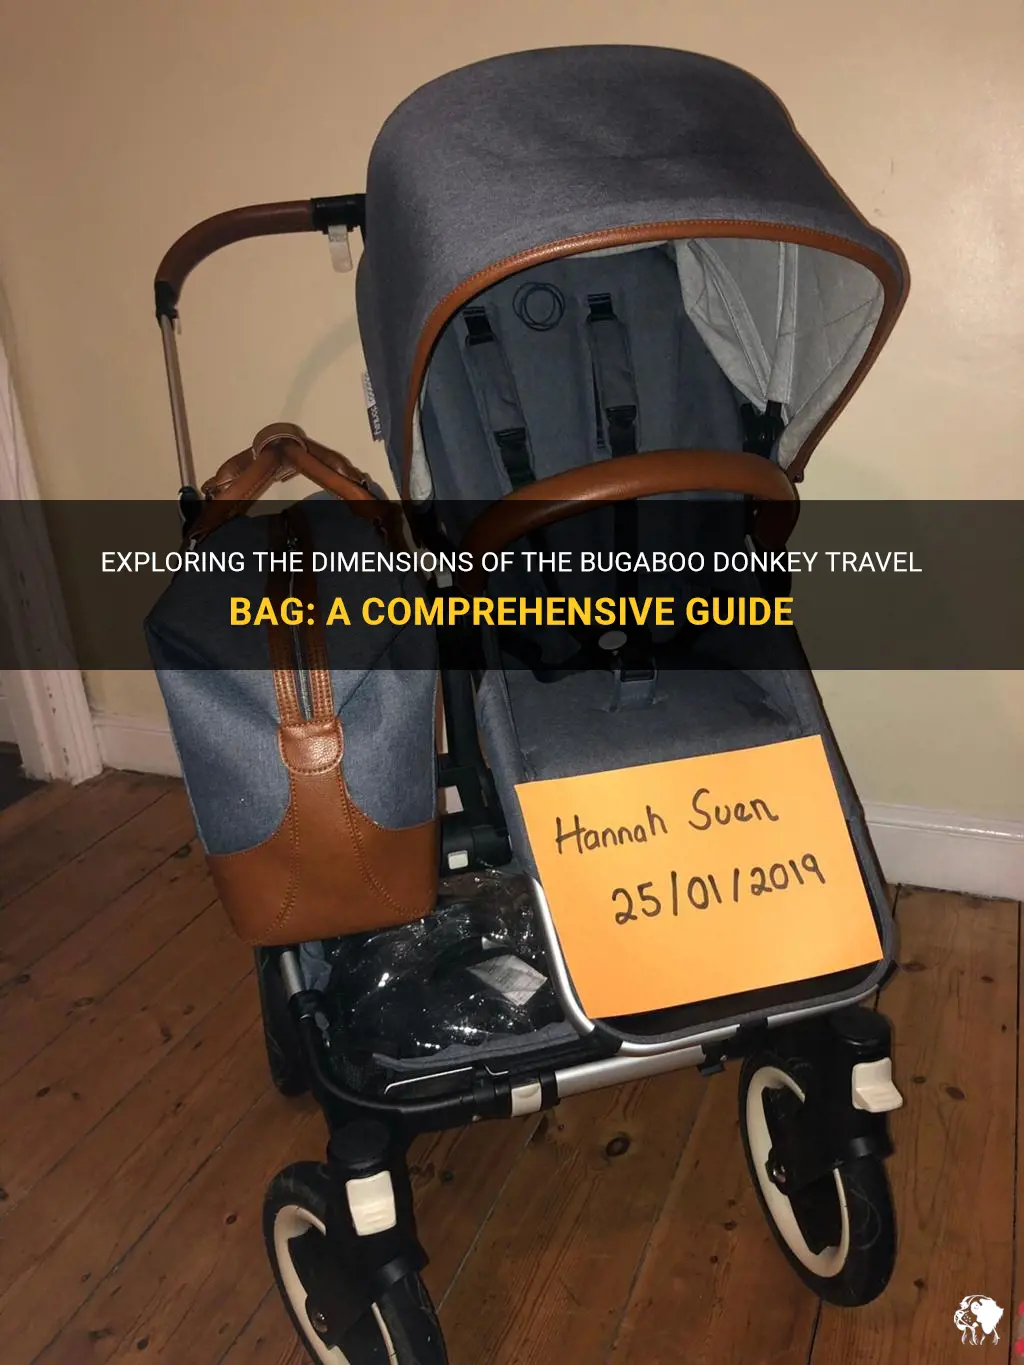 what are the dimensions of bugaboo donkey travel bag